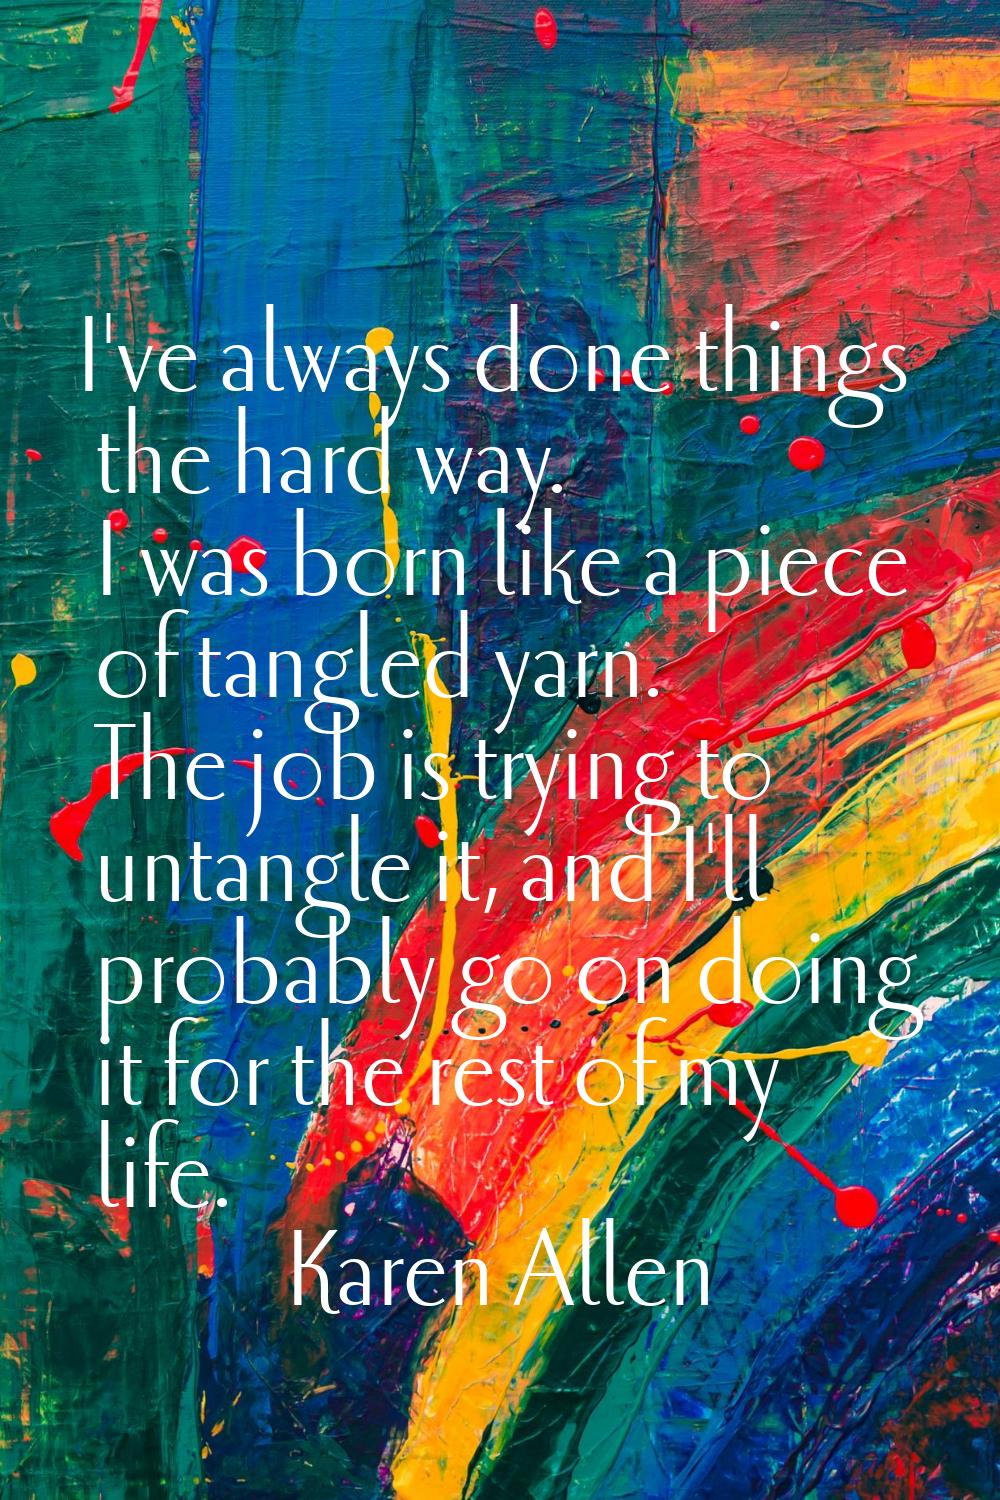 I've always done things the hard way. I was born like a piece of tangled yarn. The job is trying to